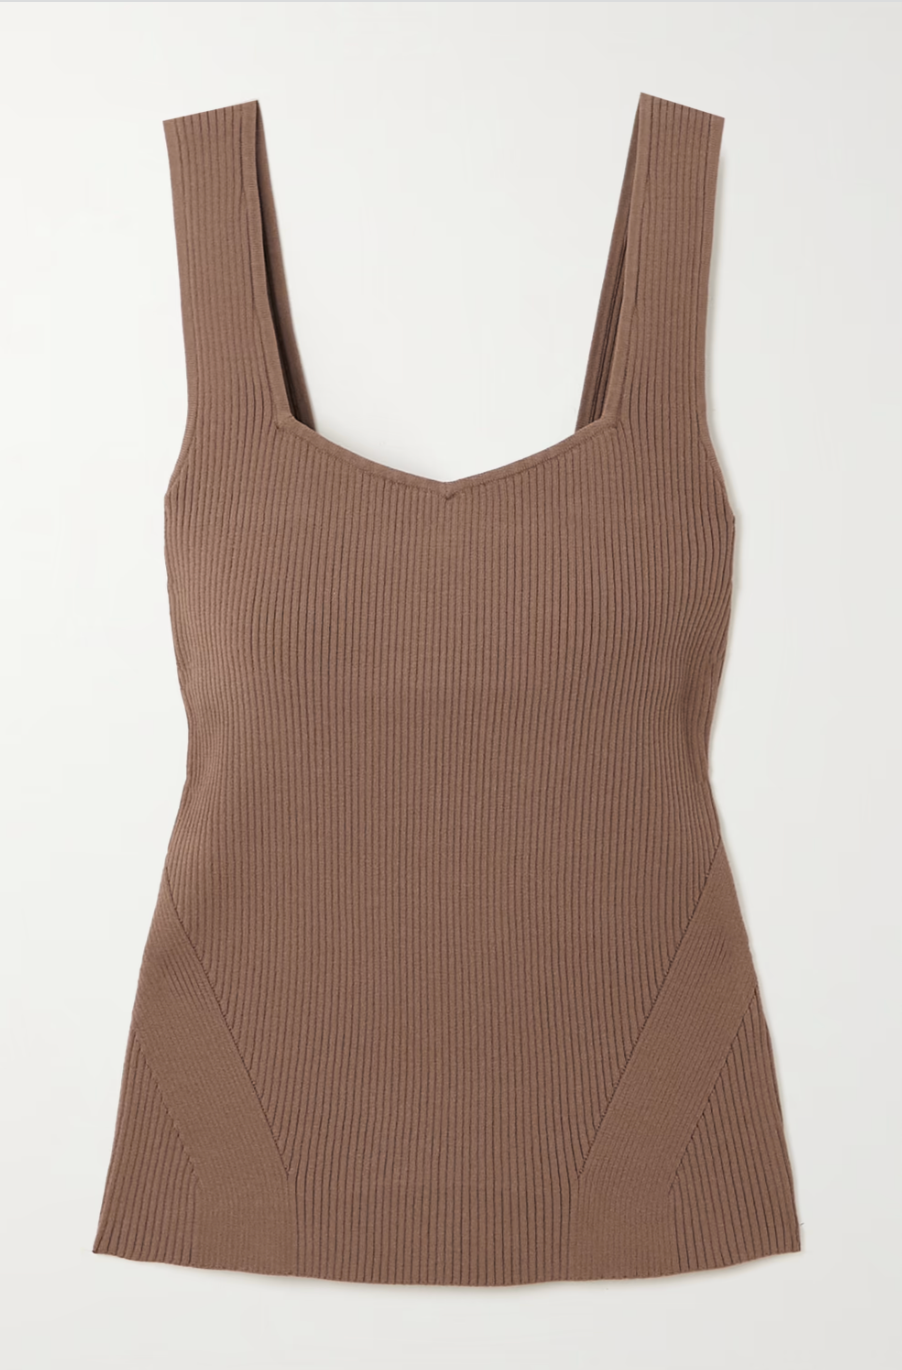 ASHER TANK IN LIGHT BROWN - Romi Boutique